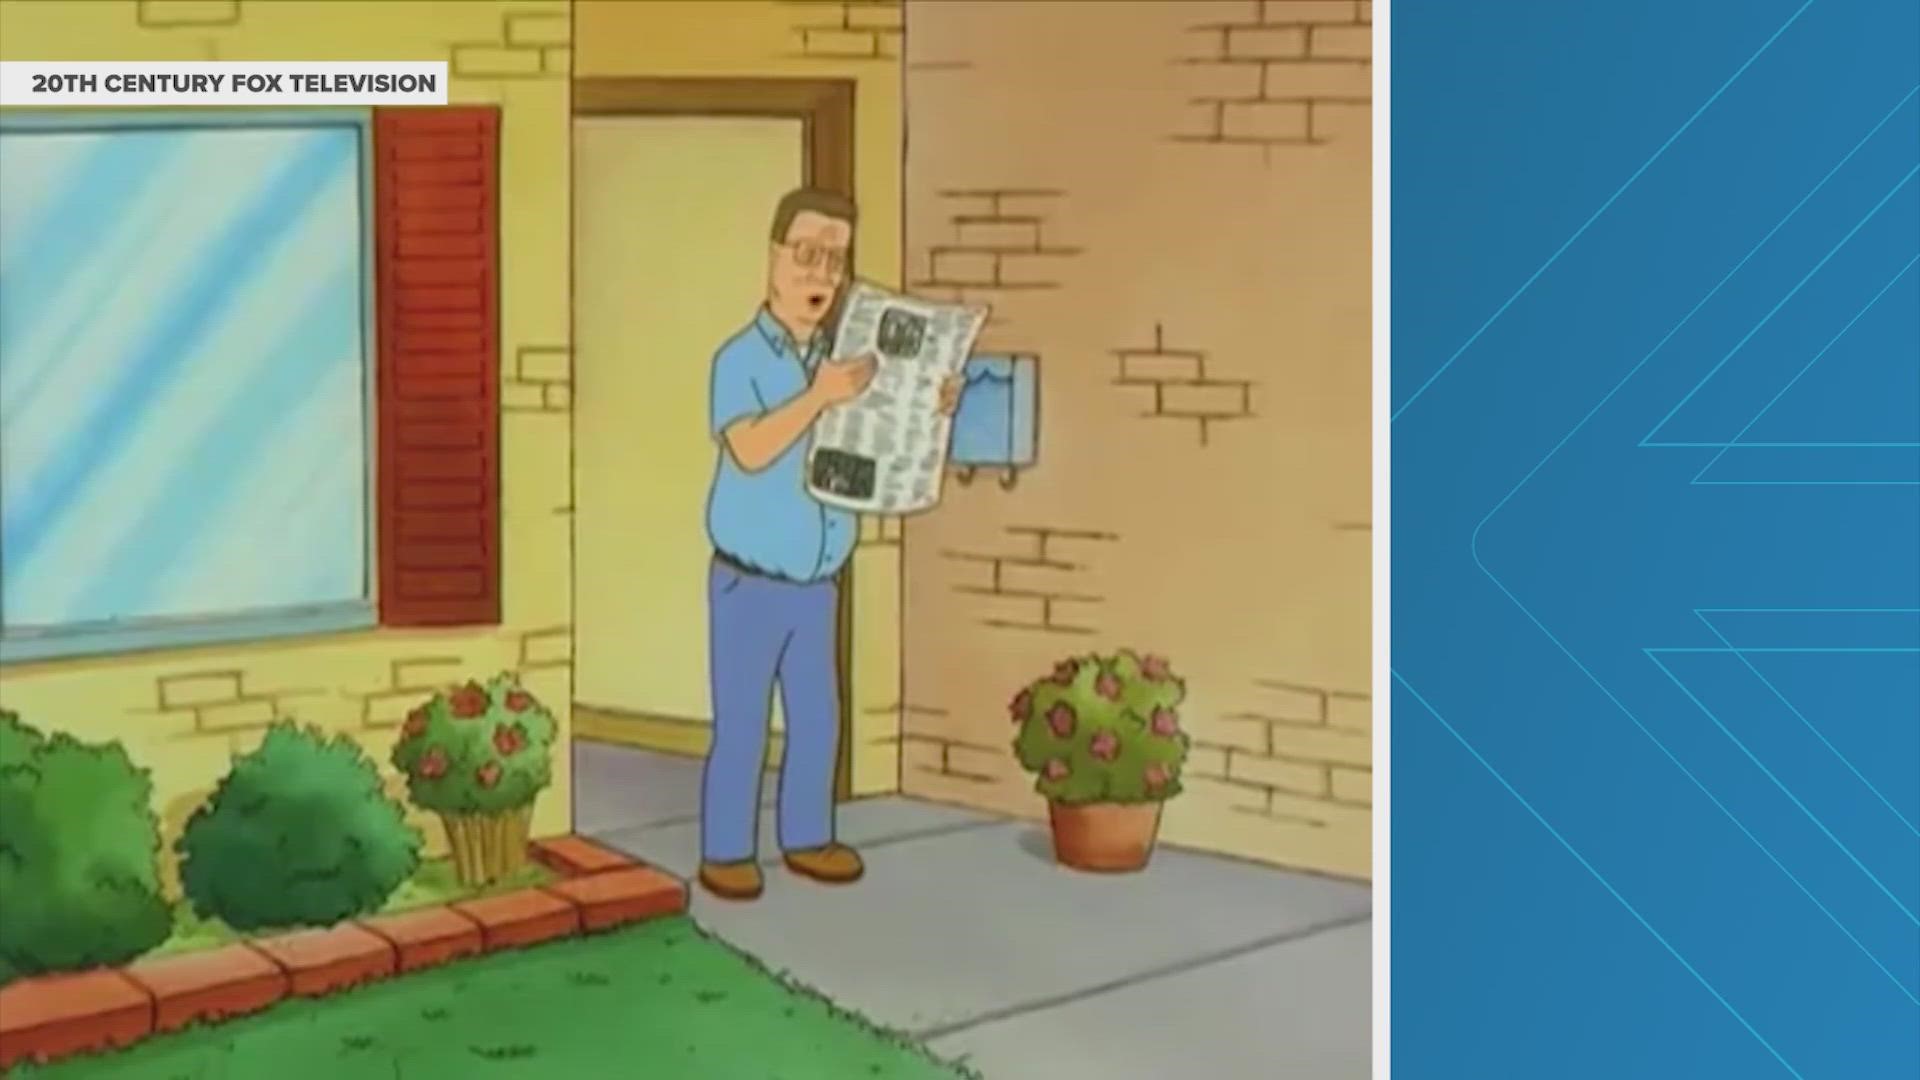 The animated series “King of the Hill” is officially making a comeback more than 25 years after its debut on Fox.